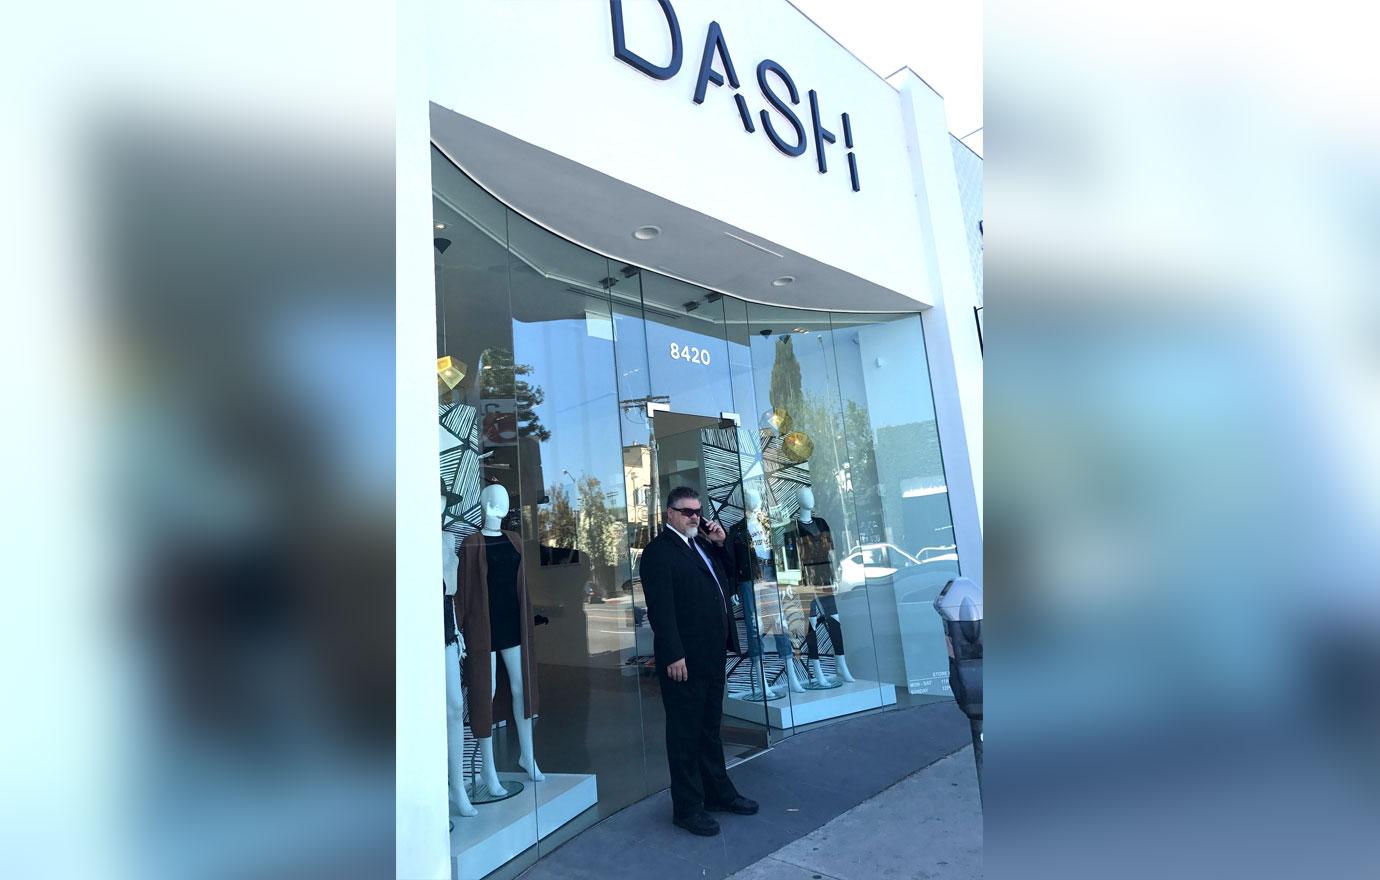 The Kardashians Closing All Dash Stores – The Hollywood Reporter